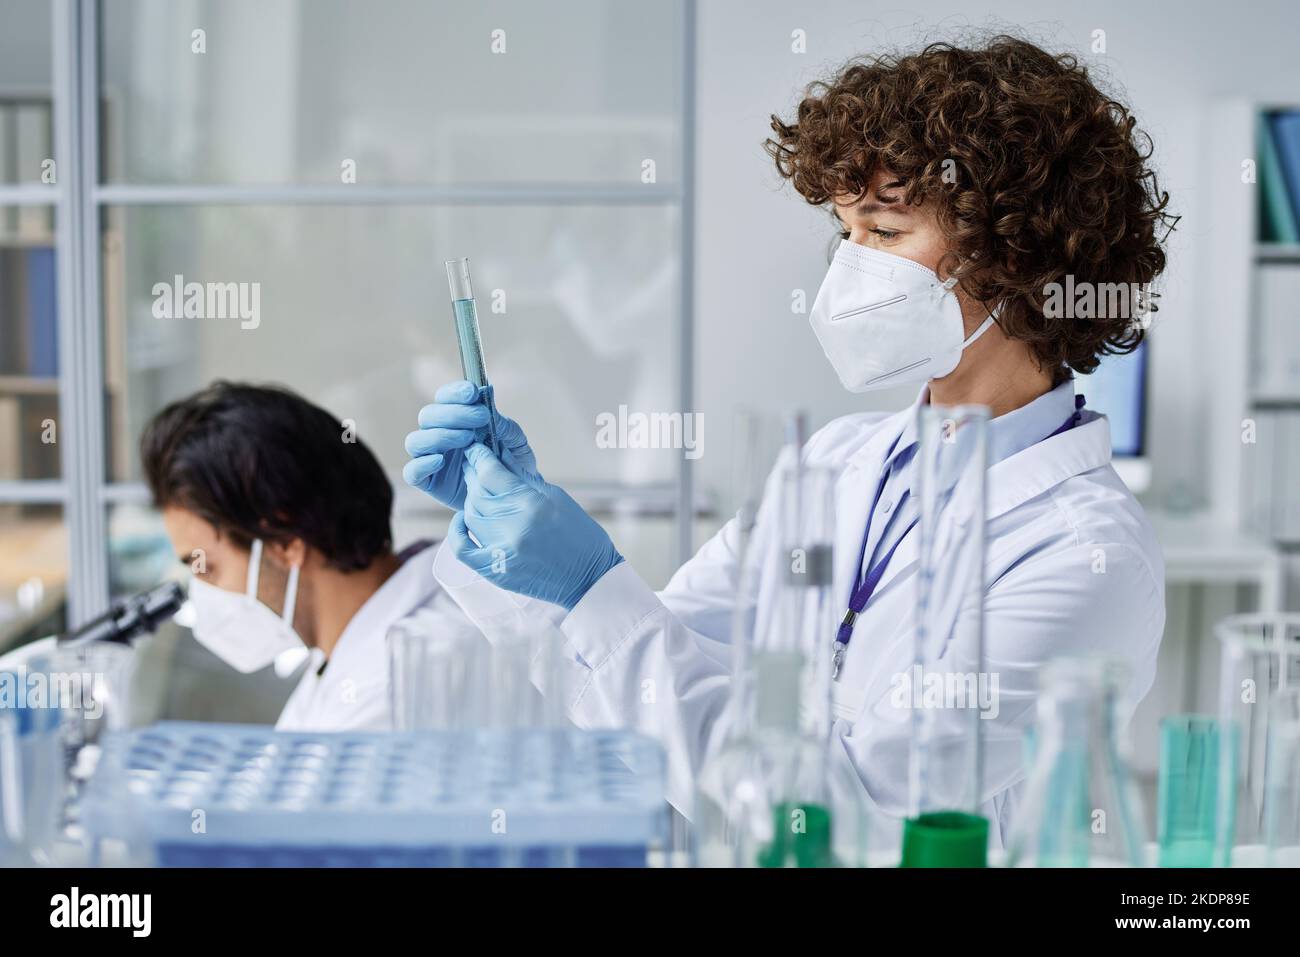 Young female scientist in respirator, labcoat and protective gloves looking at flask with blue liquid against colleague Stock Photo